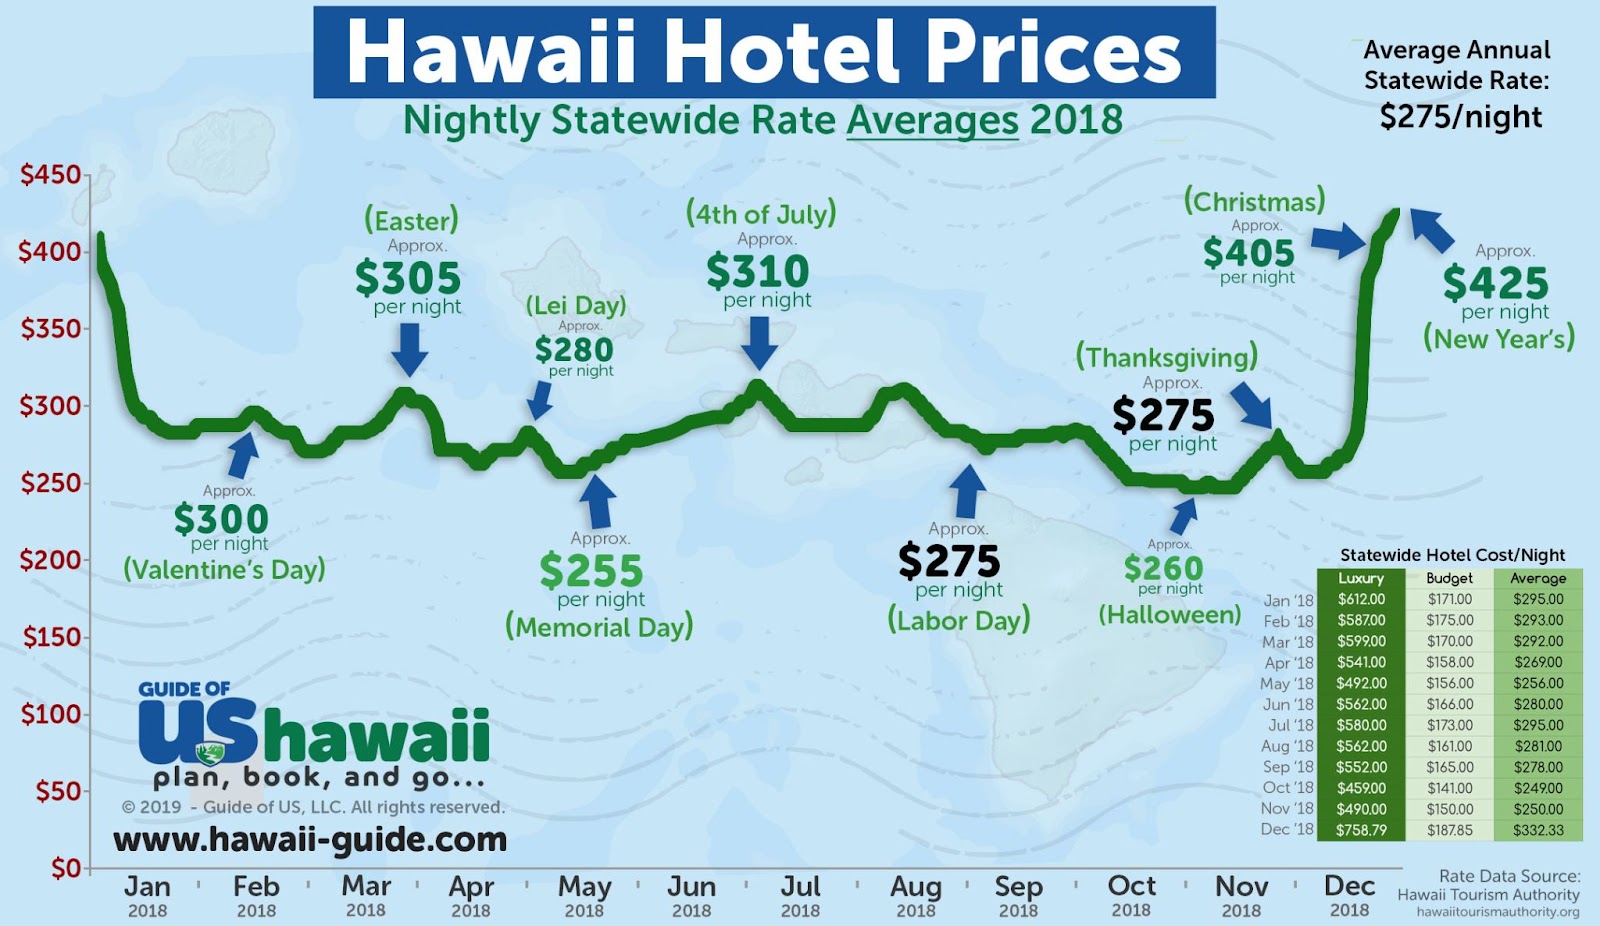 Hotel prices on holidays